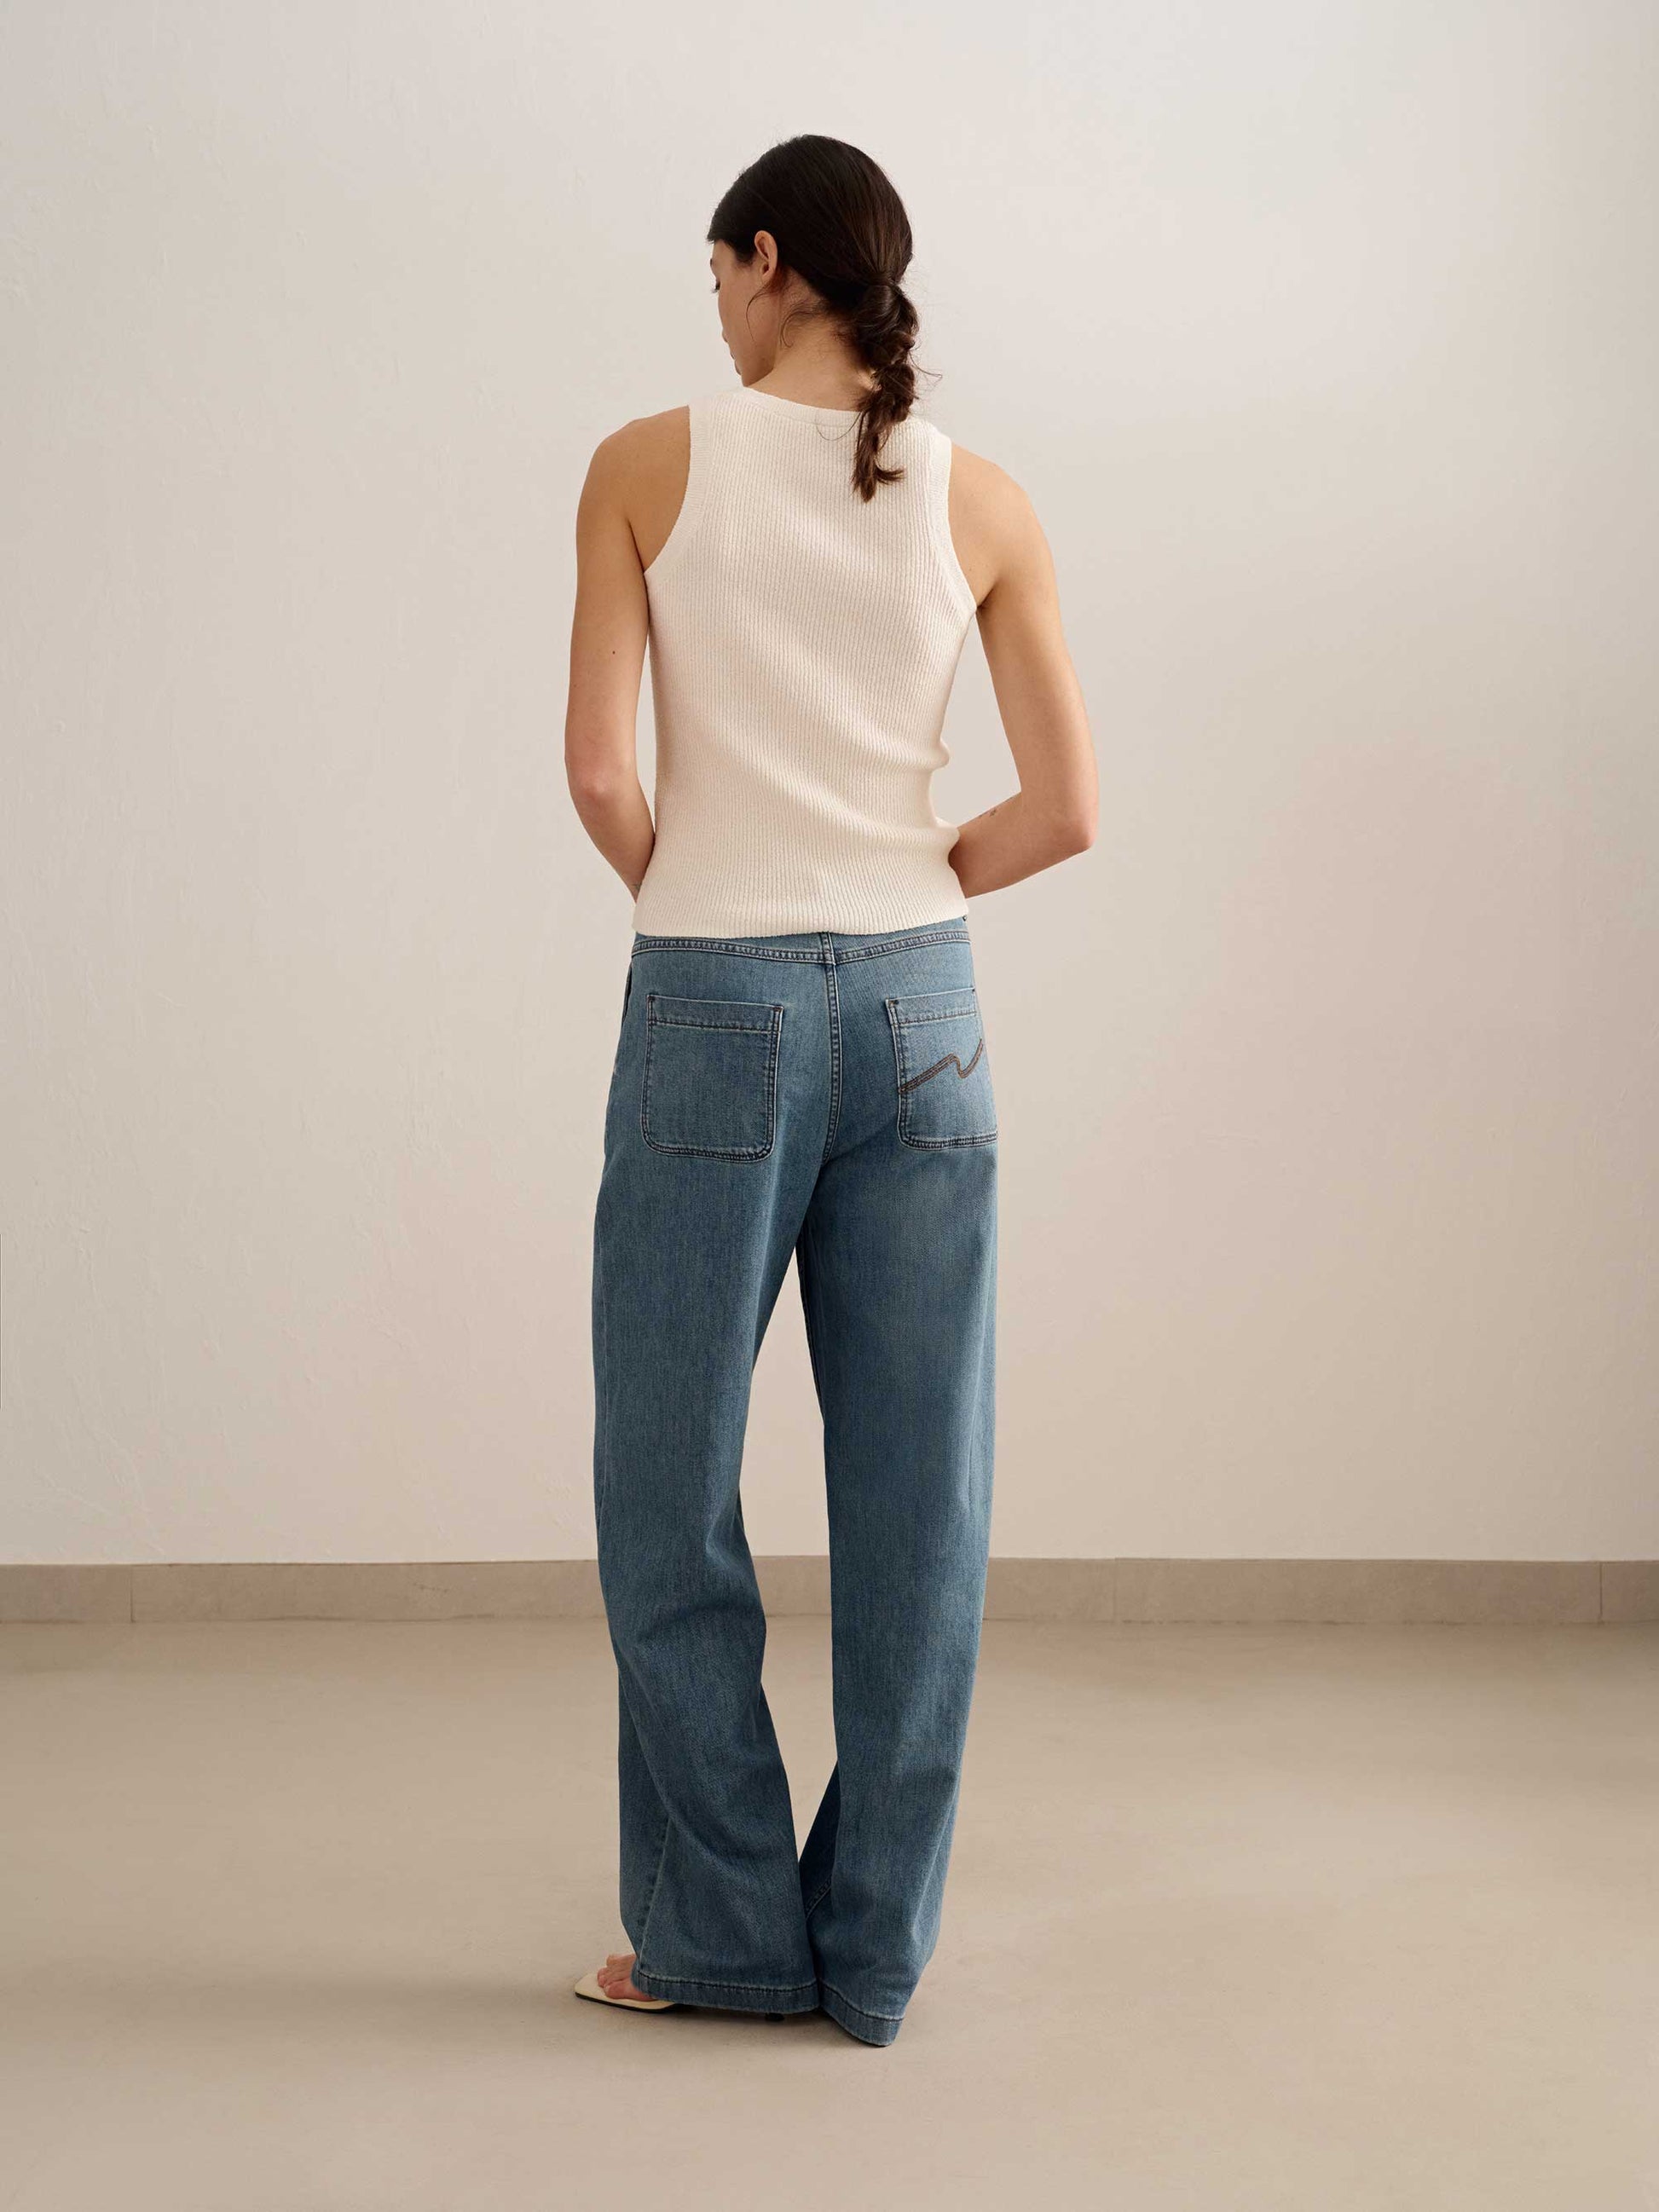 back of a woman wearing white tank and blue jeans